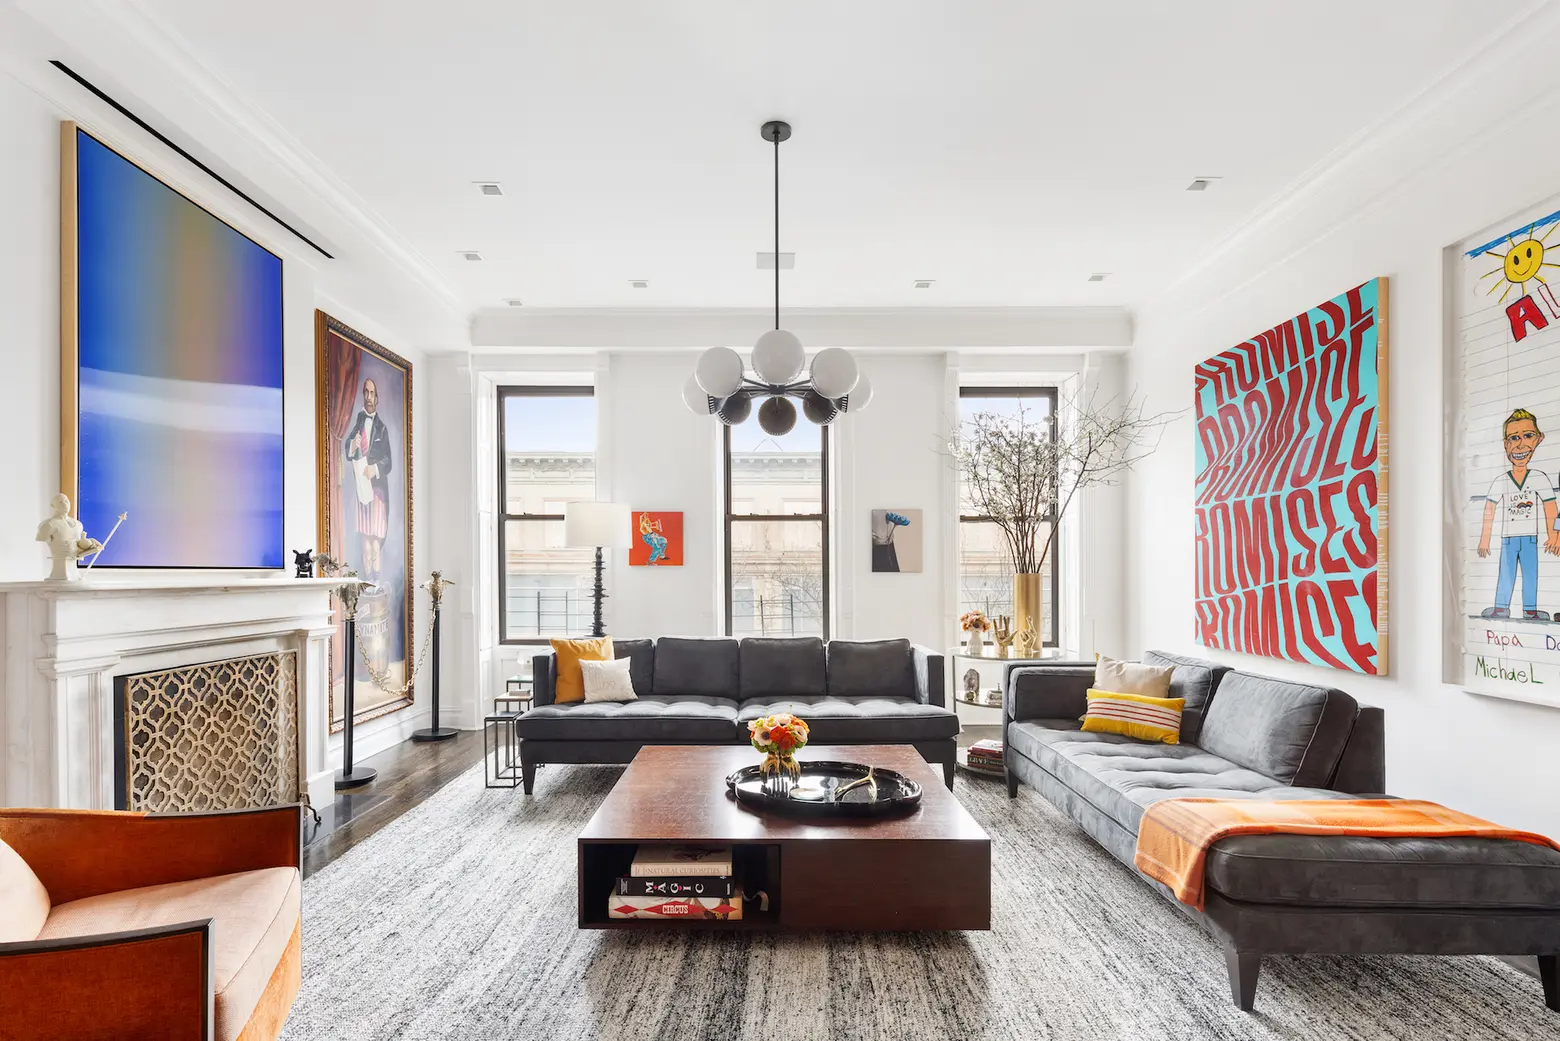 Neil Patrick Harris and David Burtka sell Harlem townhouse listed for $7.3M